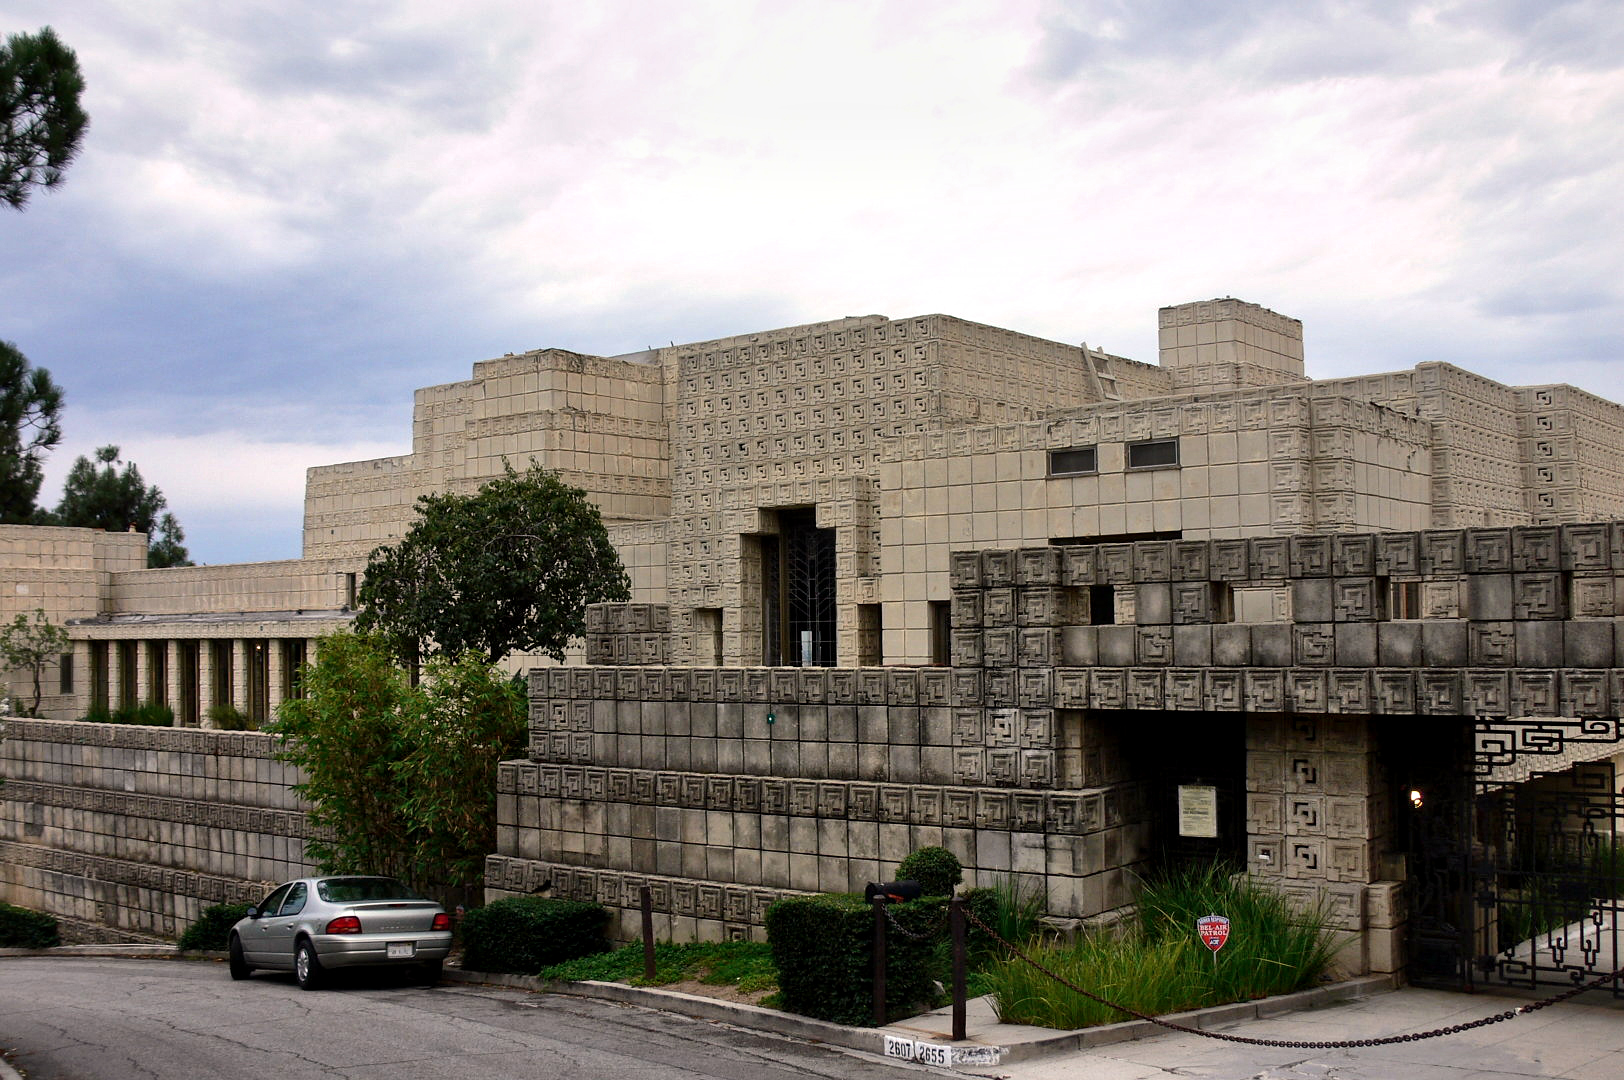 Ennis_House_front_view_2005.jpg